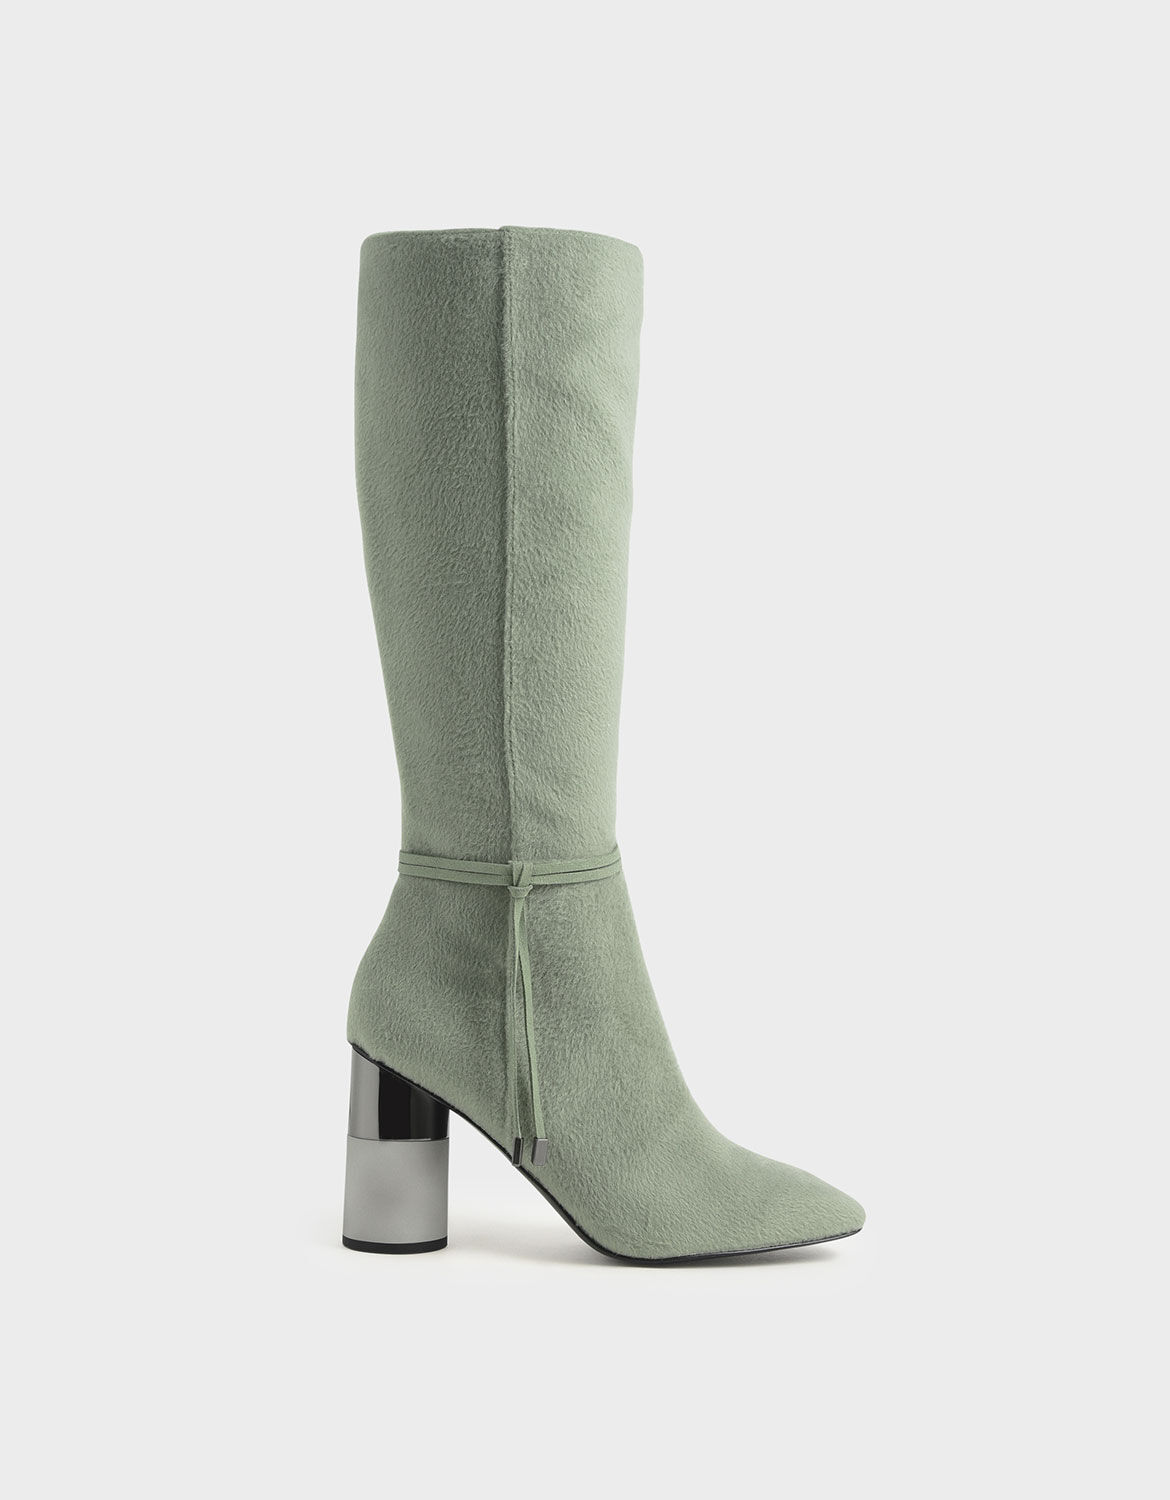 sage green boots